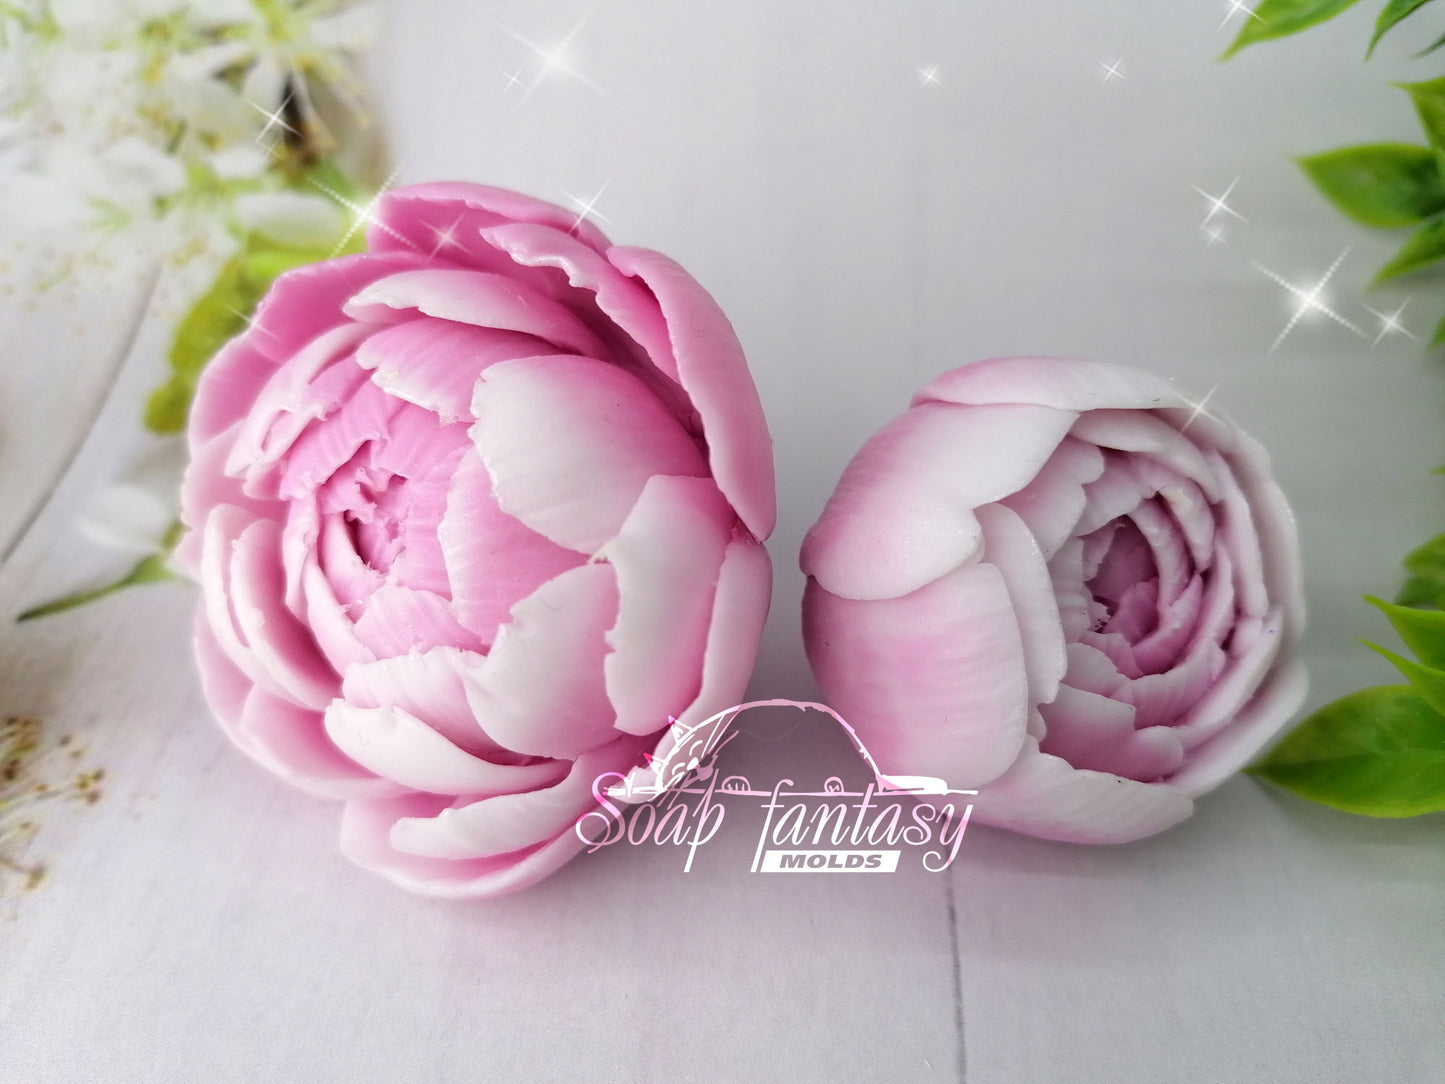 Peony bud "Snow White" silicone mold for soap making